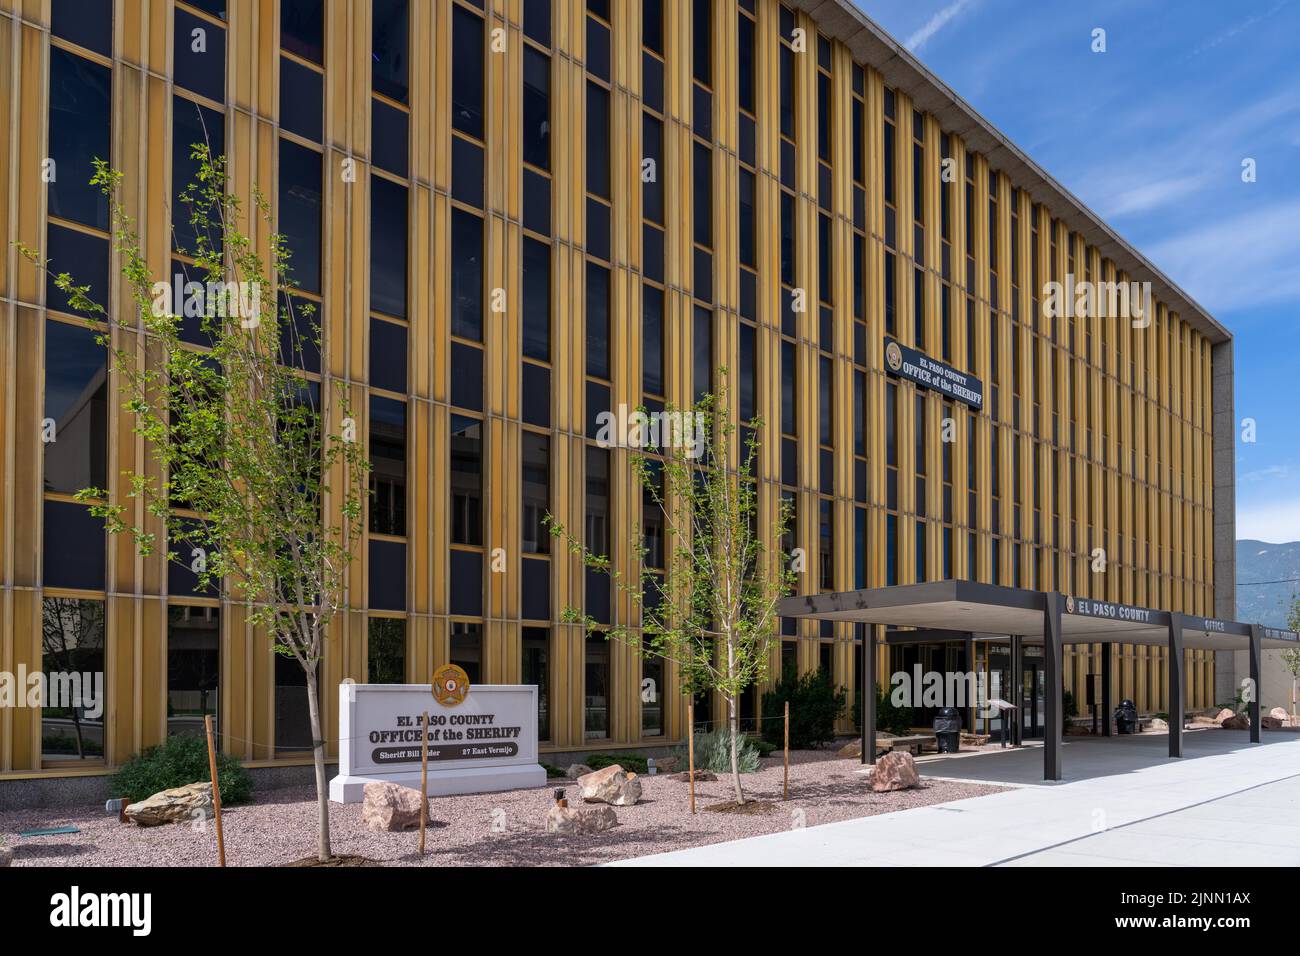 Colorado Springs, CO - July 3, 2022: The El Paso County Office of the Sheriff building is on E Vermijo Avenue. The El Paso County Sheriff’s Office was Stock Photo